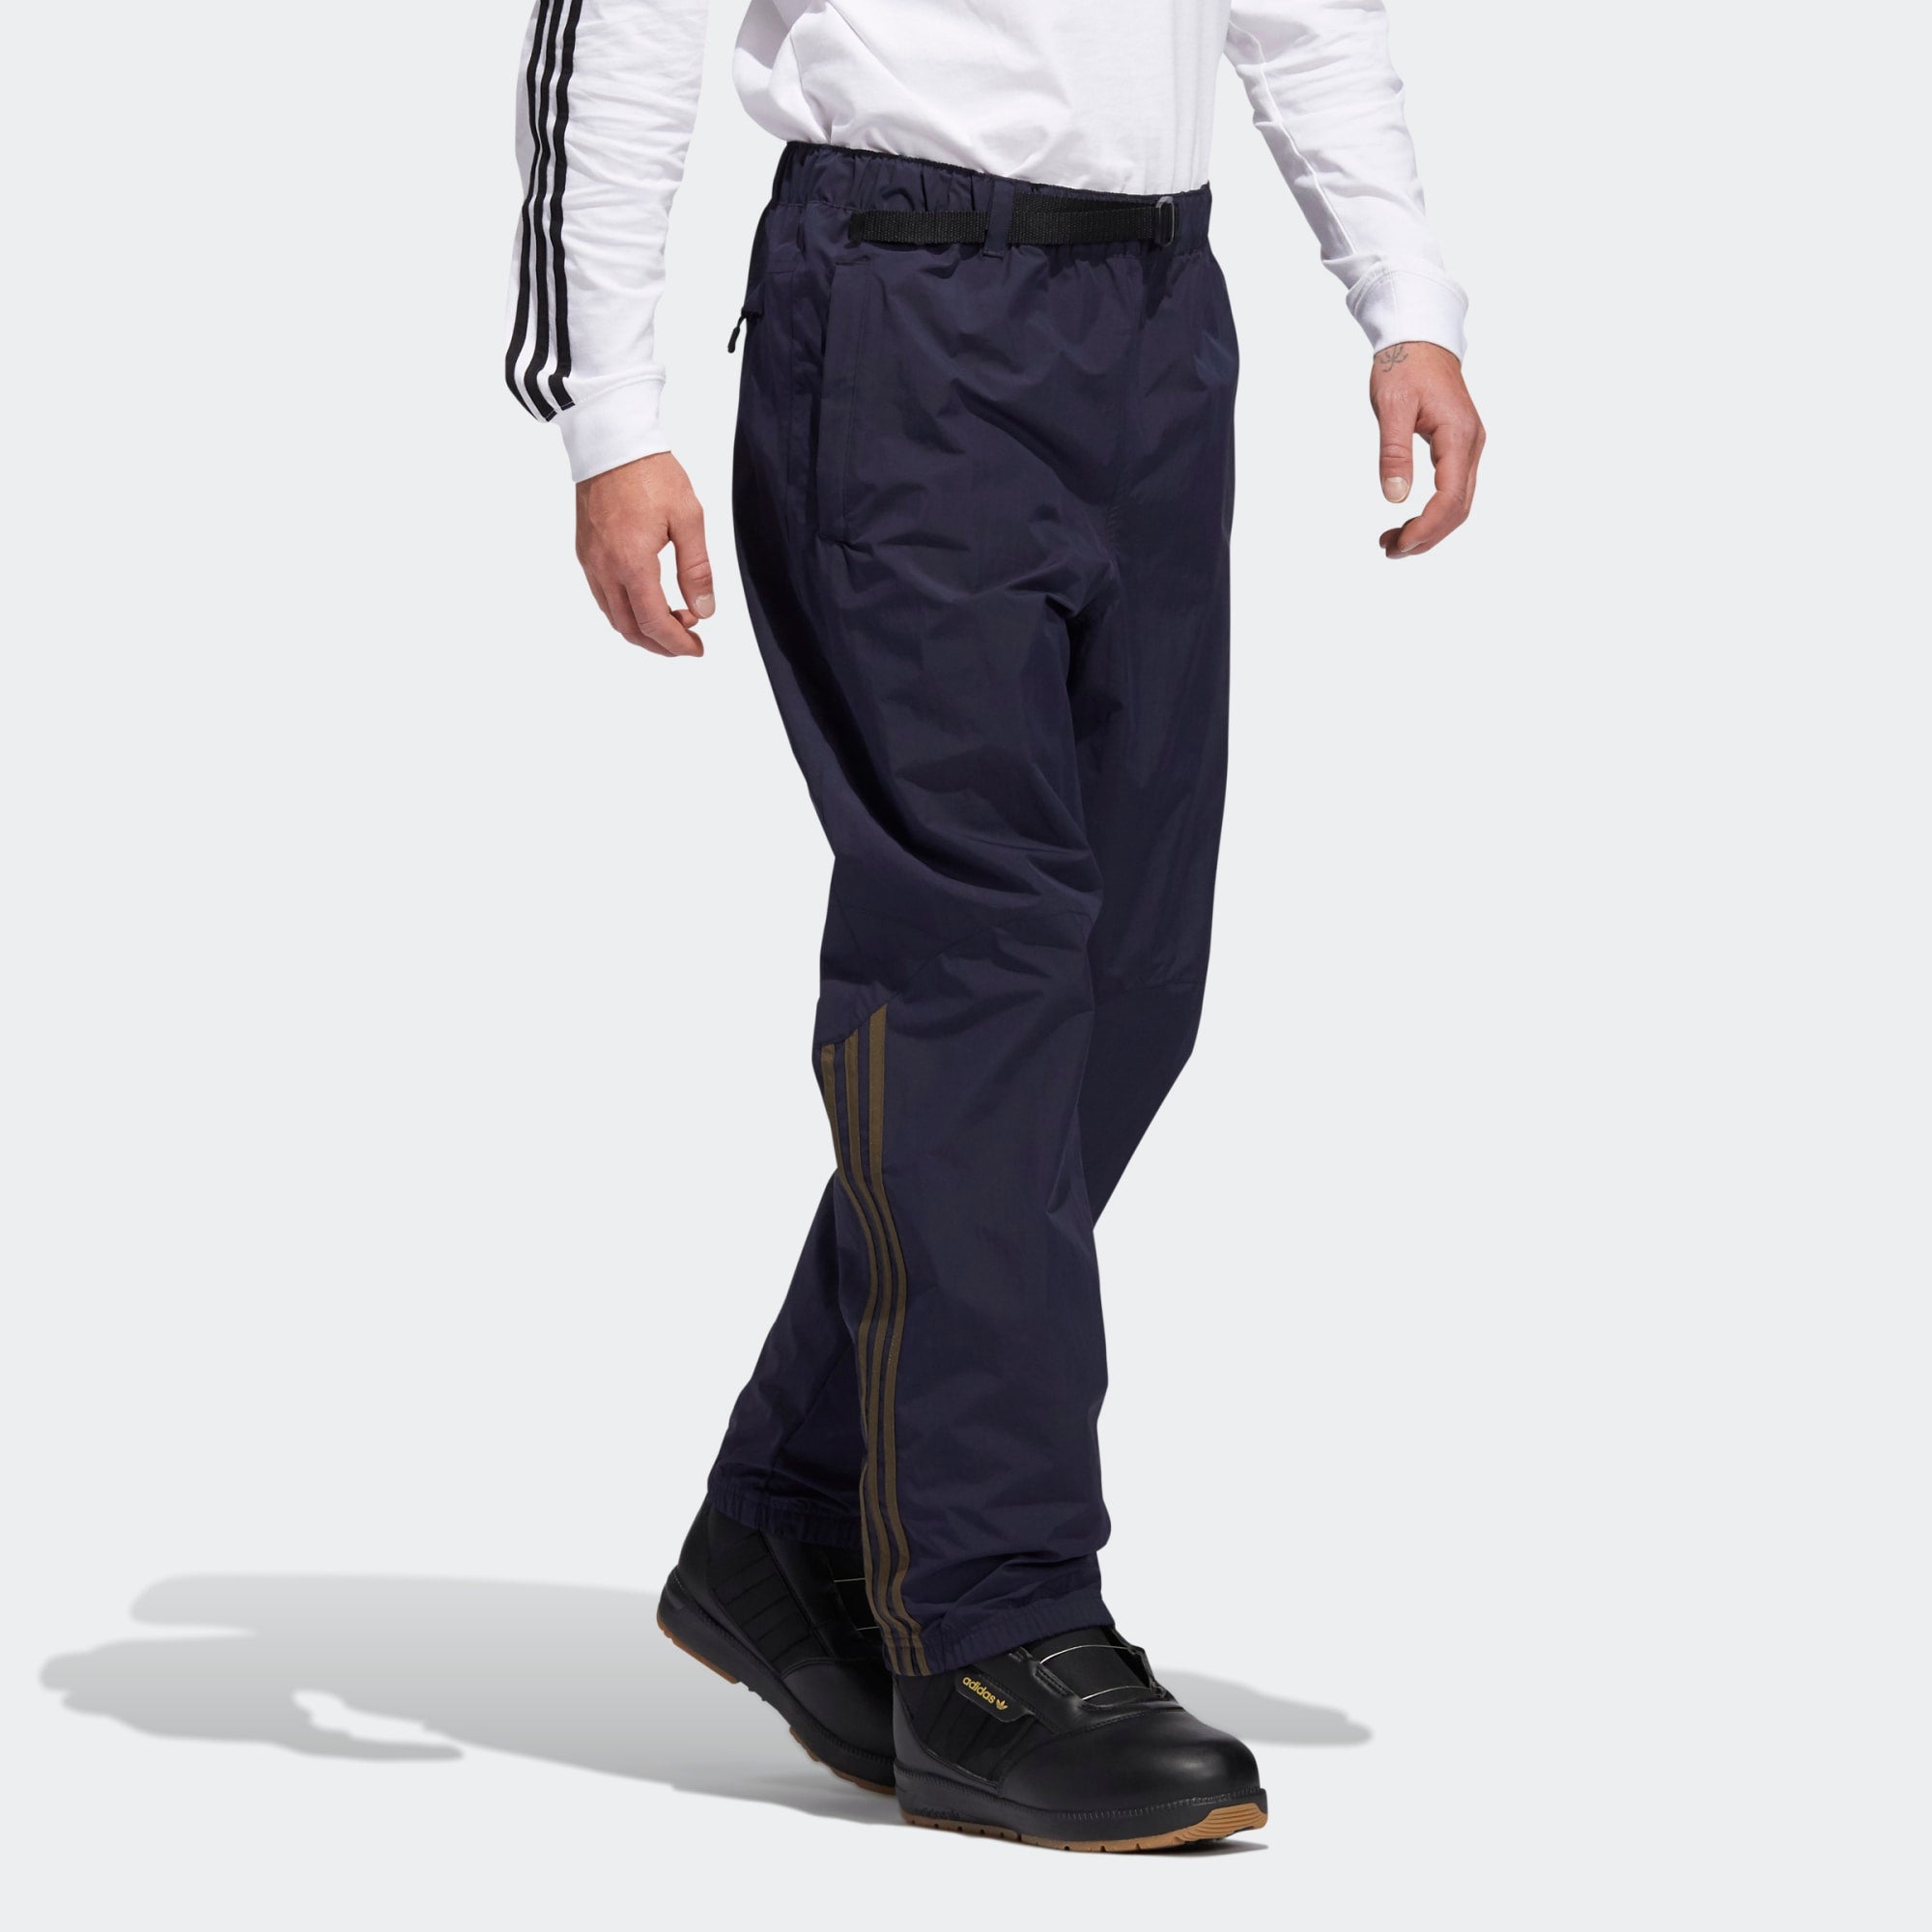 Legend Ink 2021 Adidas Mobility Snowboard Pants